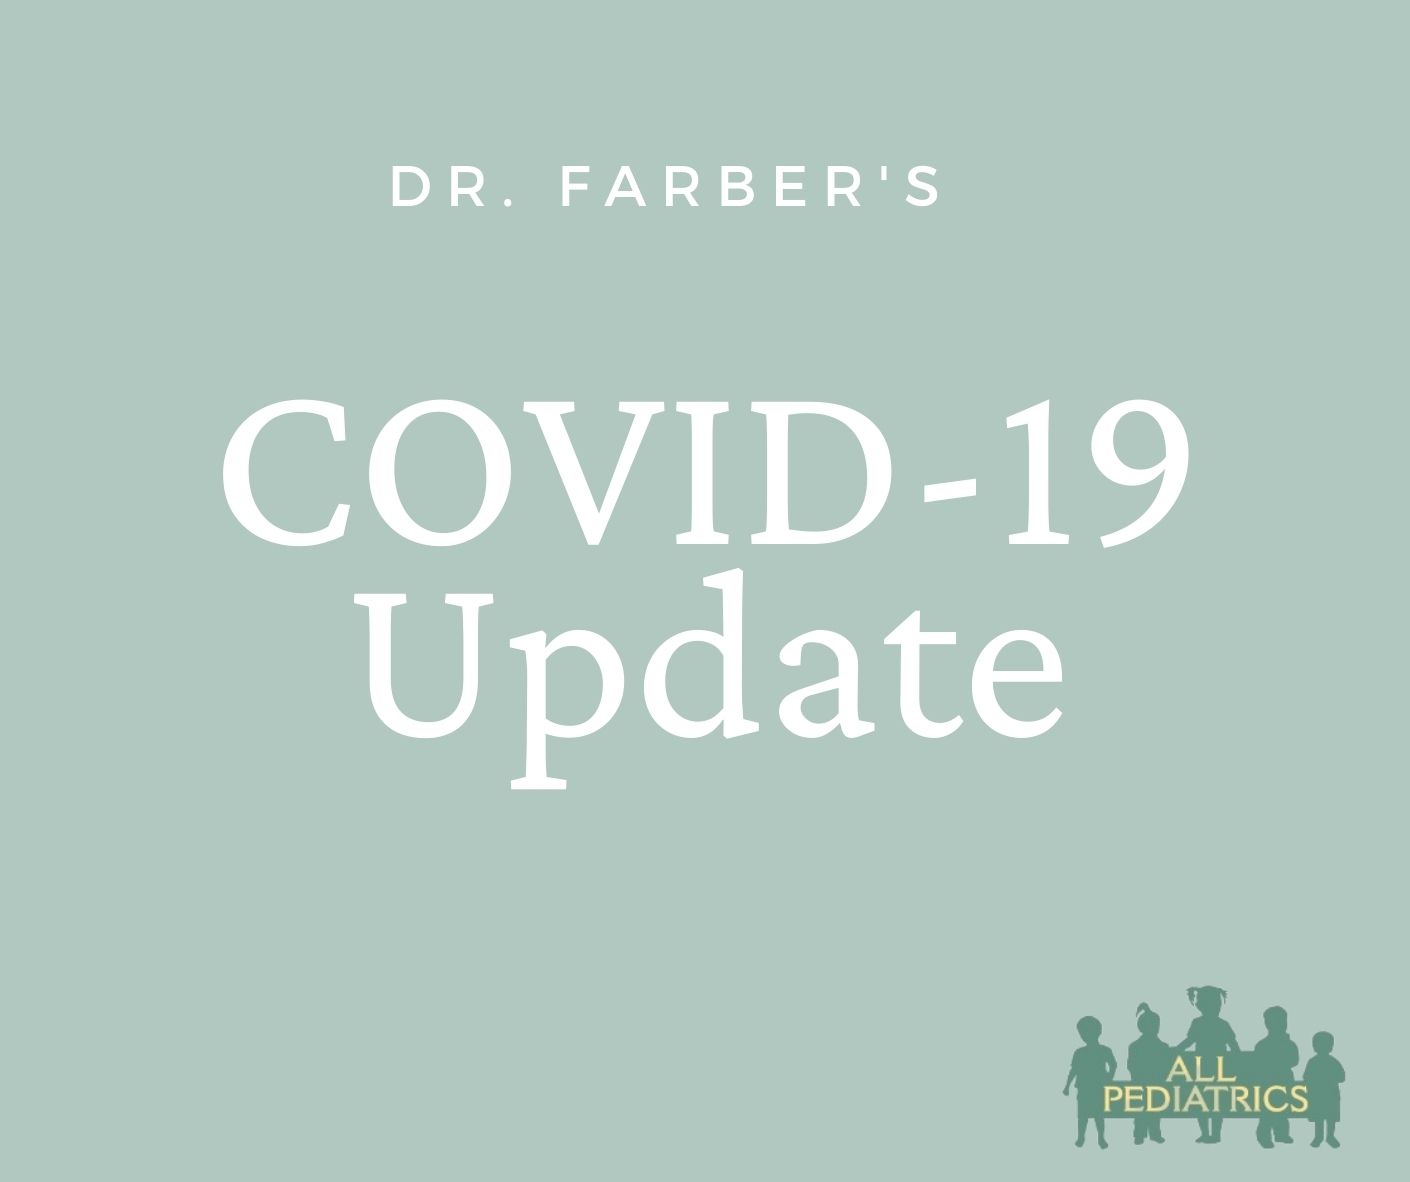 Dr. Farber's COVID-19 Update.